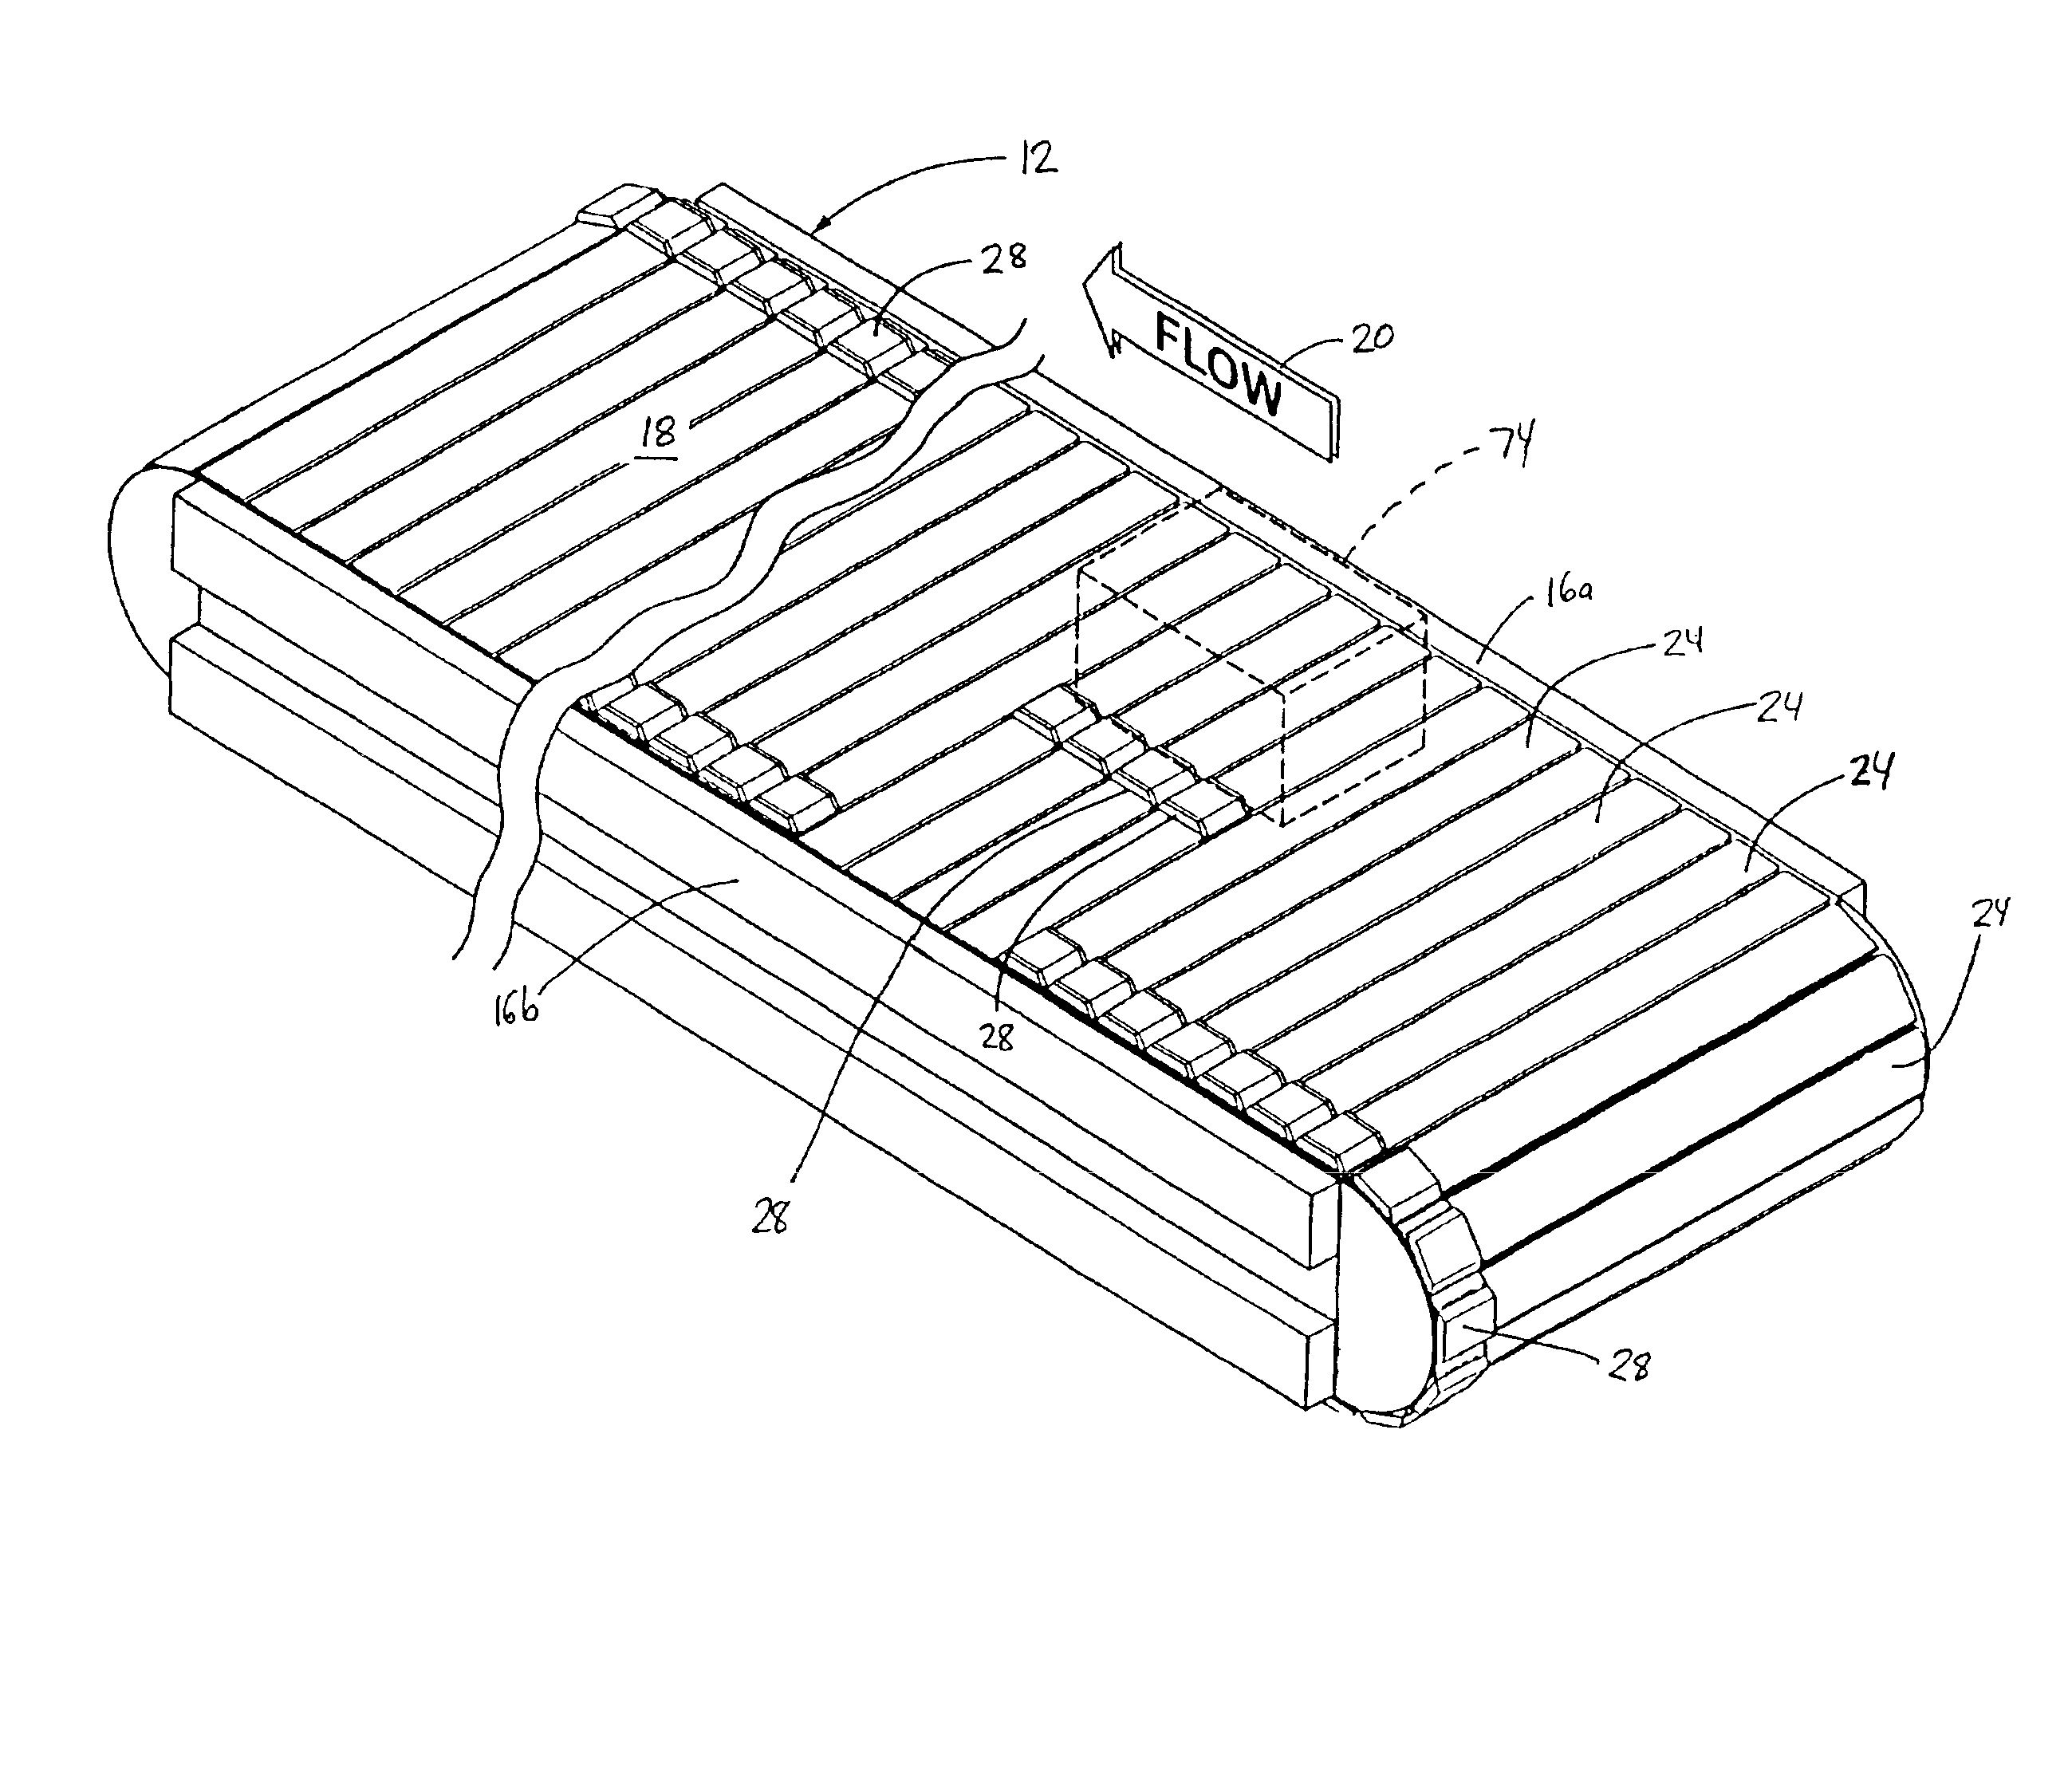 Conveyor system with diverting track network